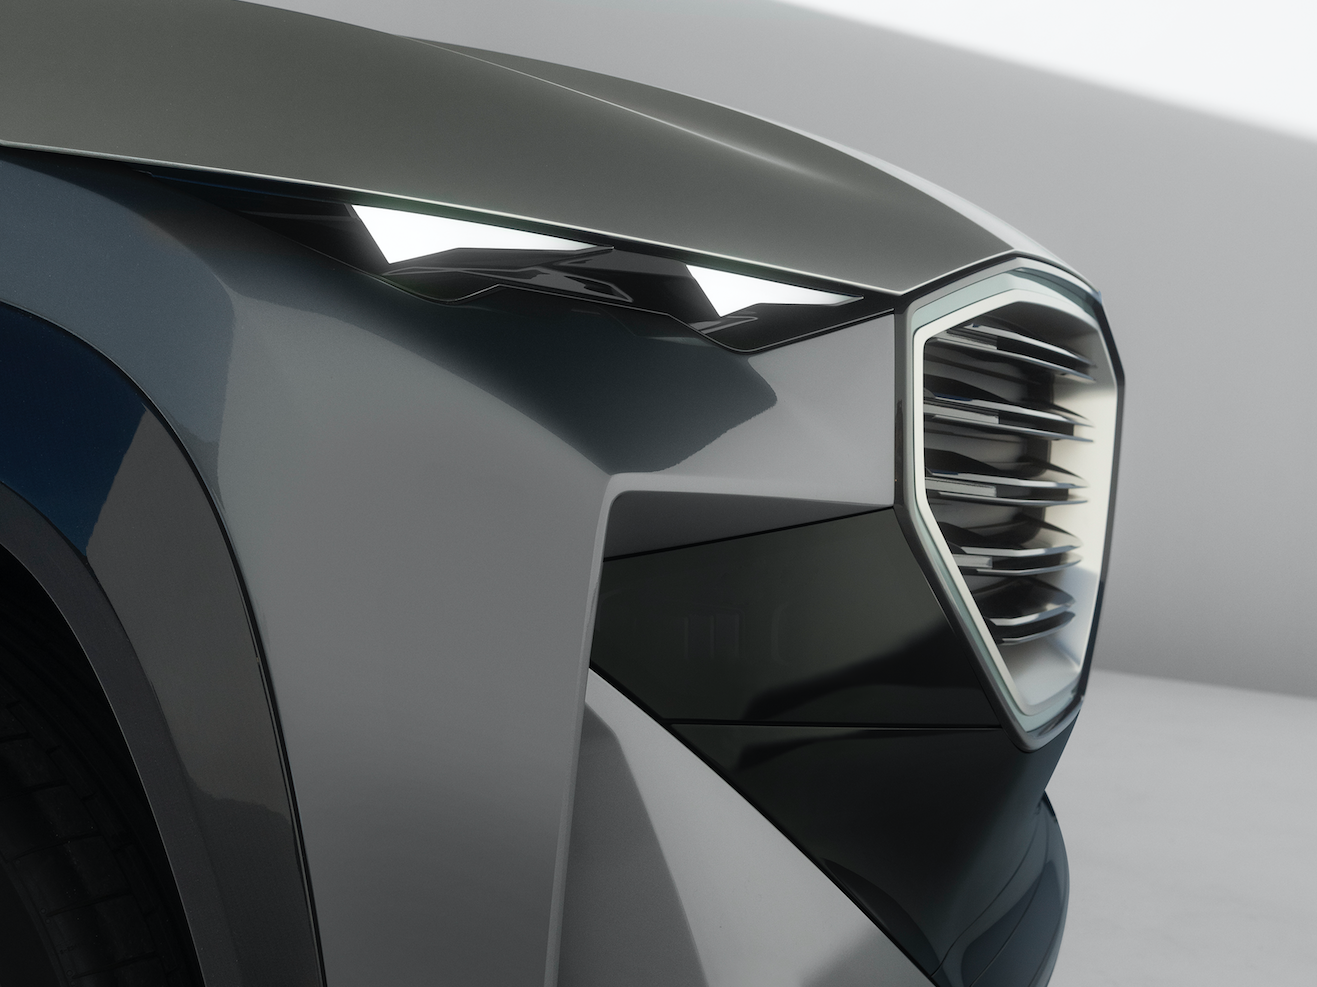 BMW’s Concept XM Will Be The First Electrified And Most Powerful M Car Ever